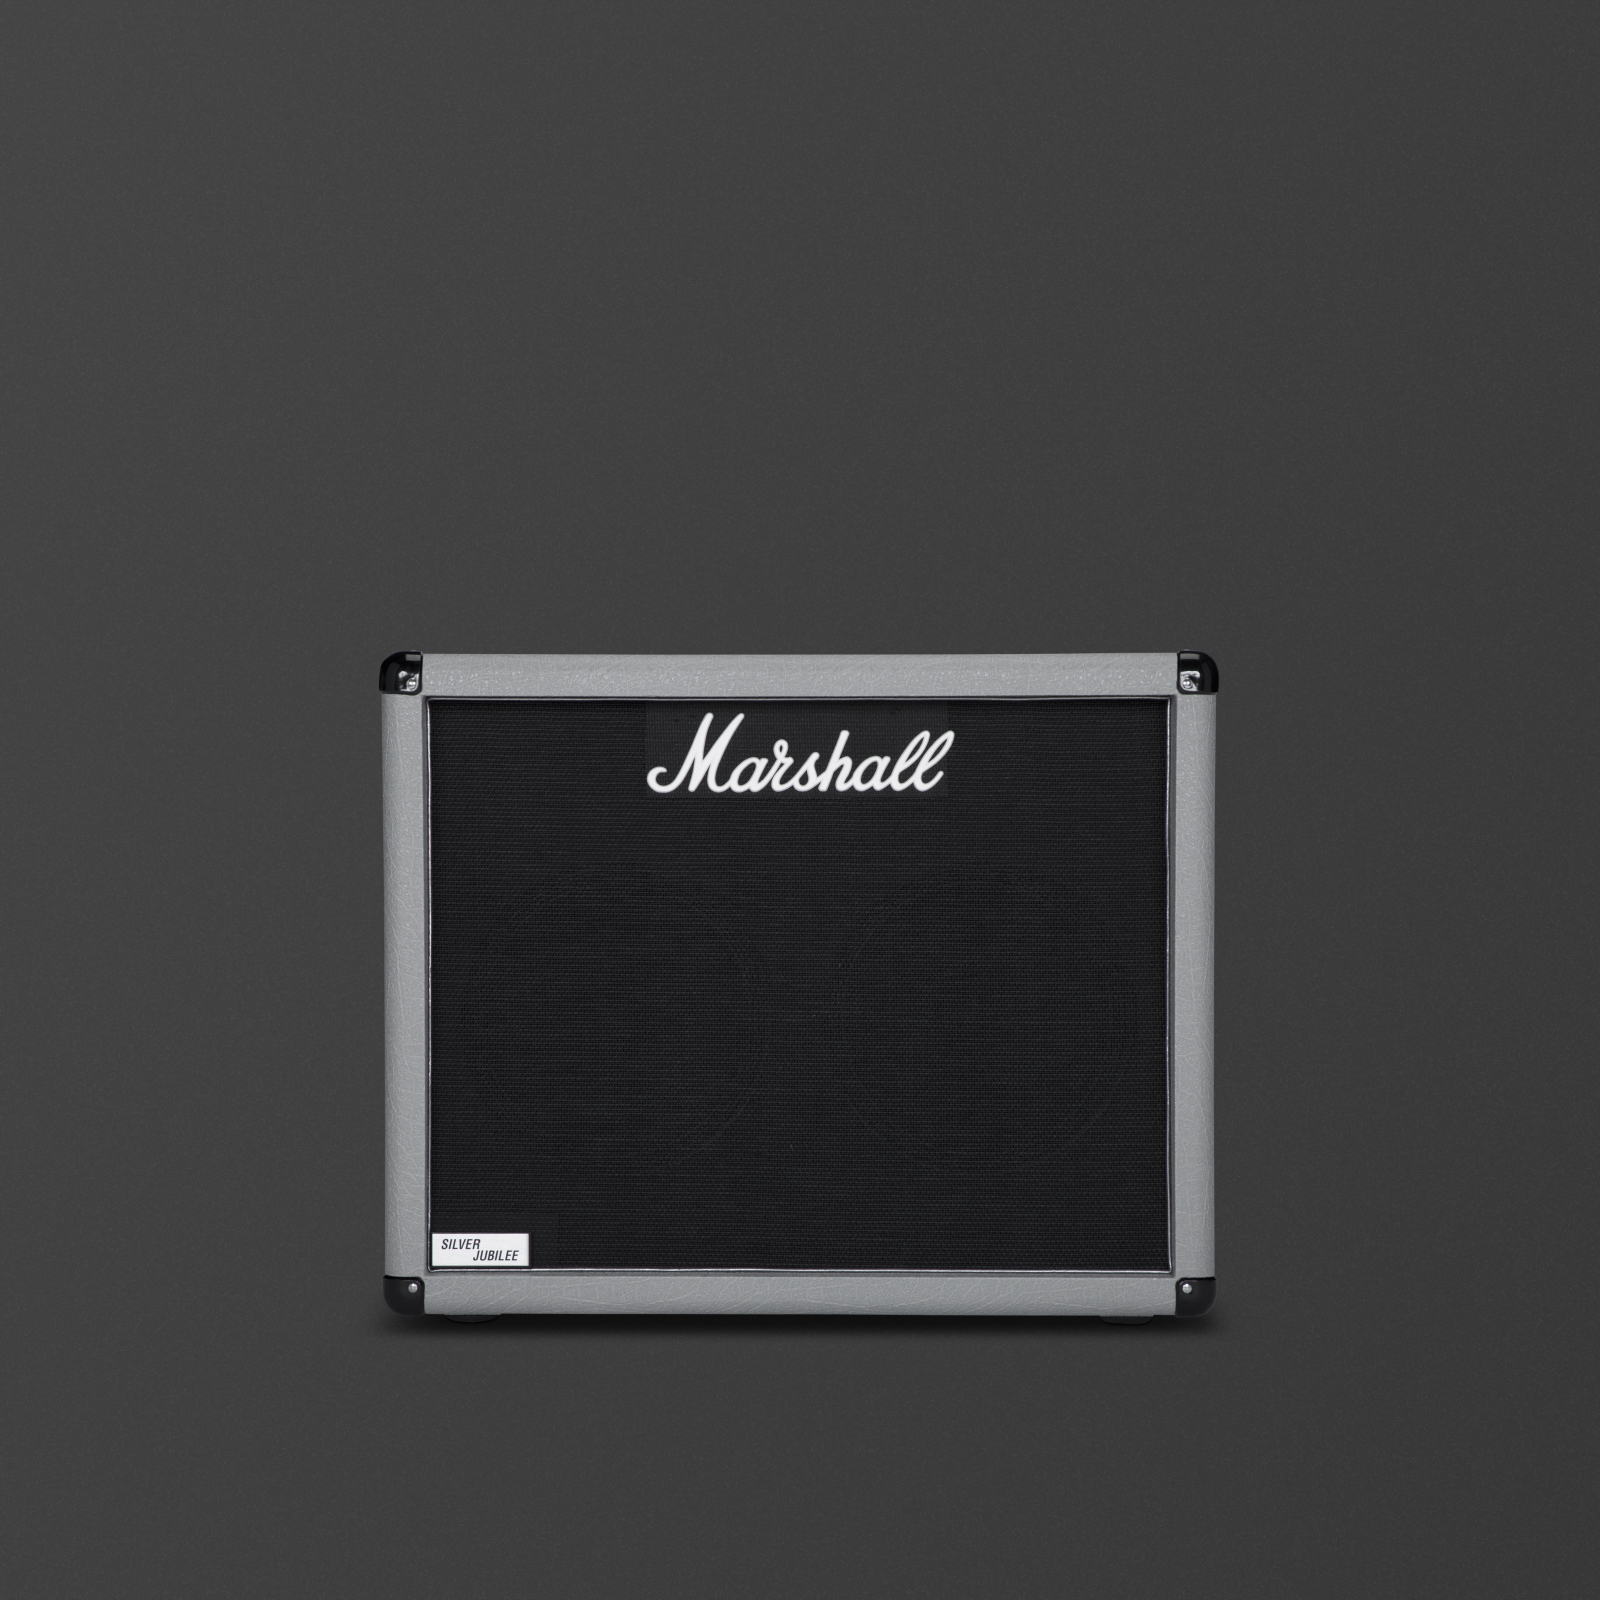 Marshall's 2536 black and silver cab.  